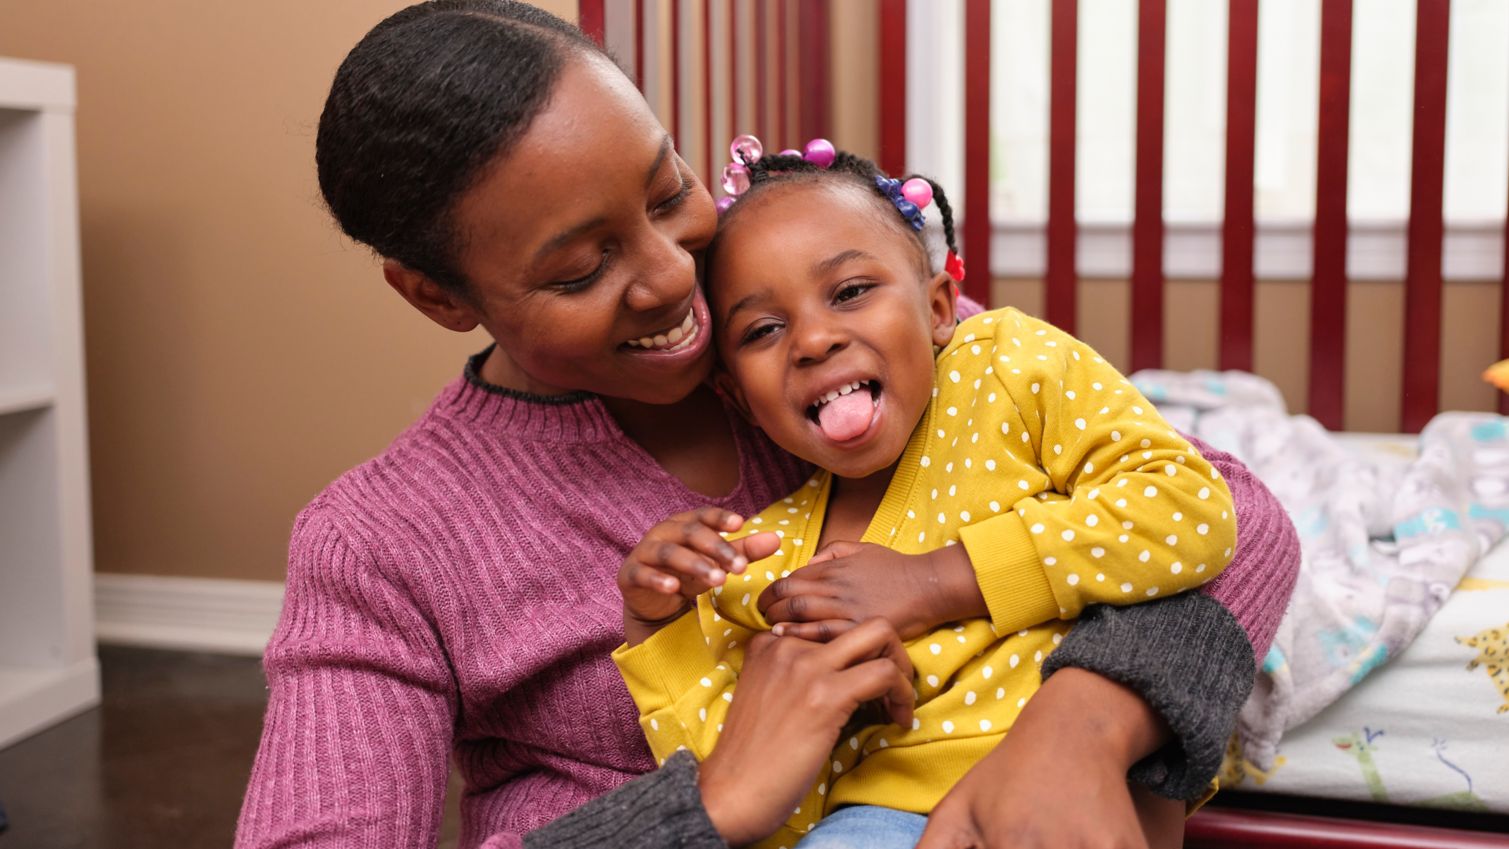 Young Medicaid member laughing with mom